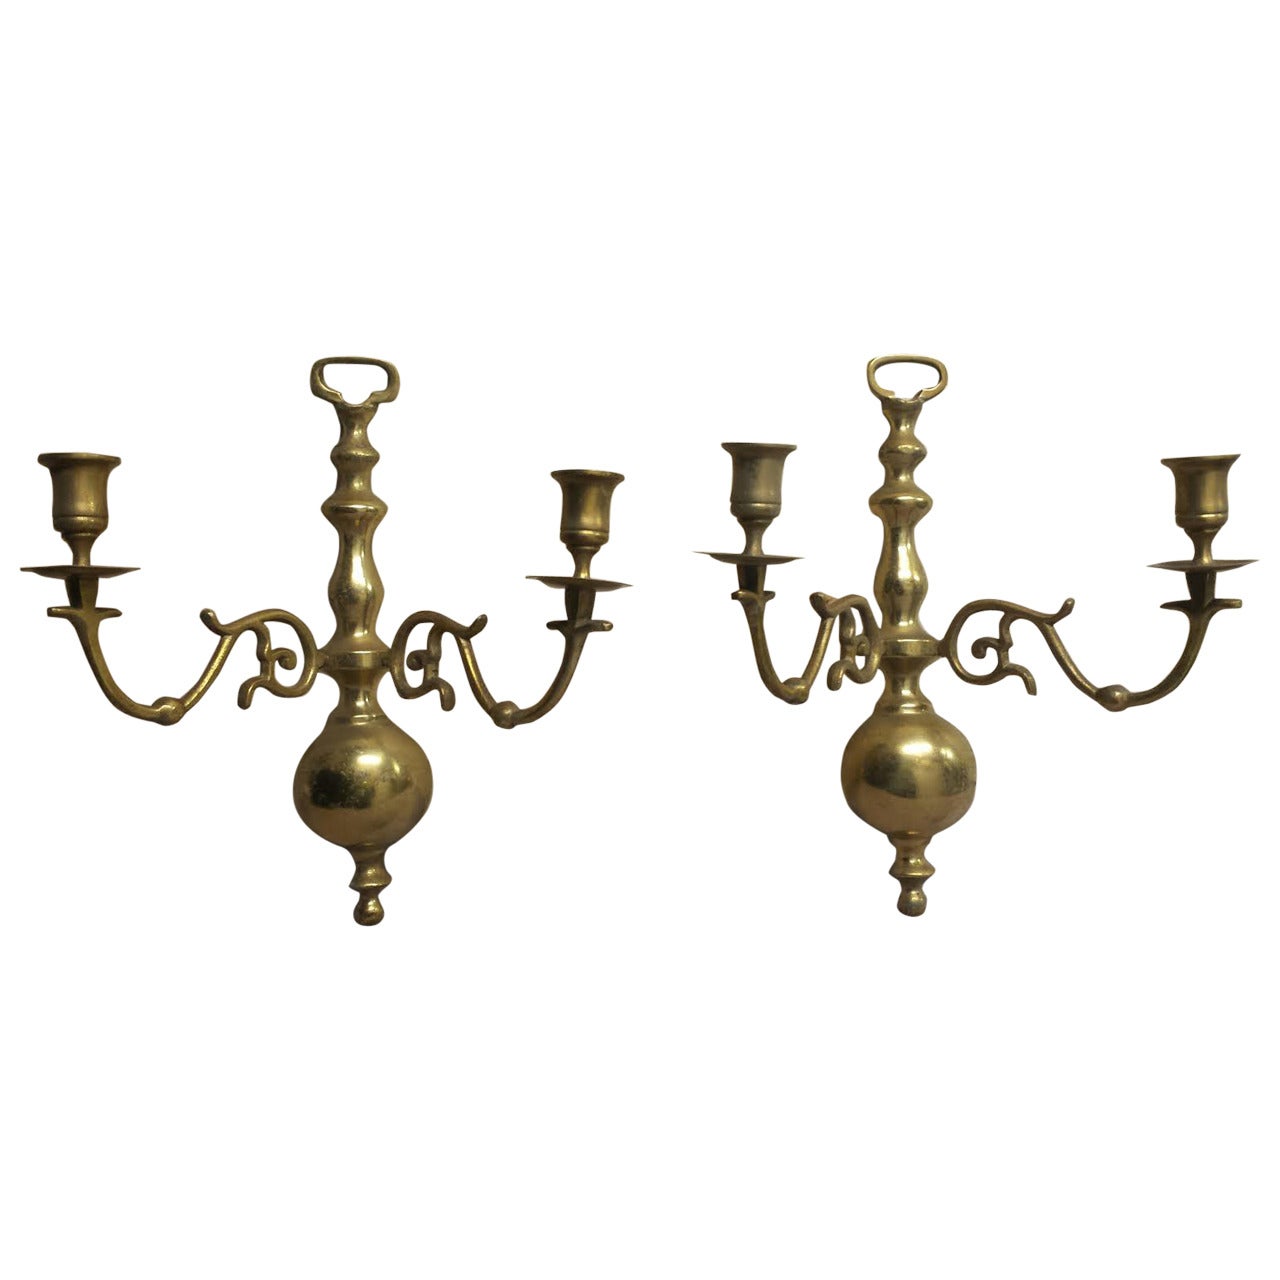 Sconnces, Pair of Mid Century Wall Sconce Candleholders For Sale